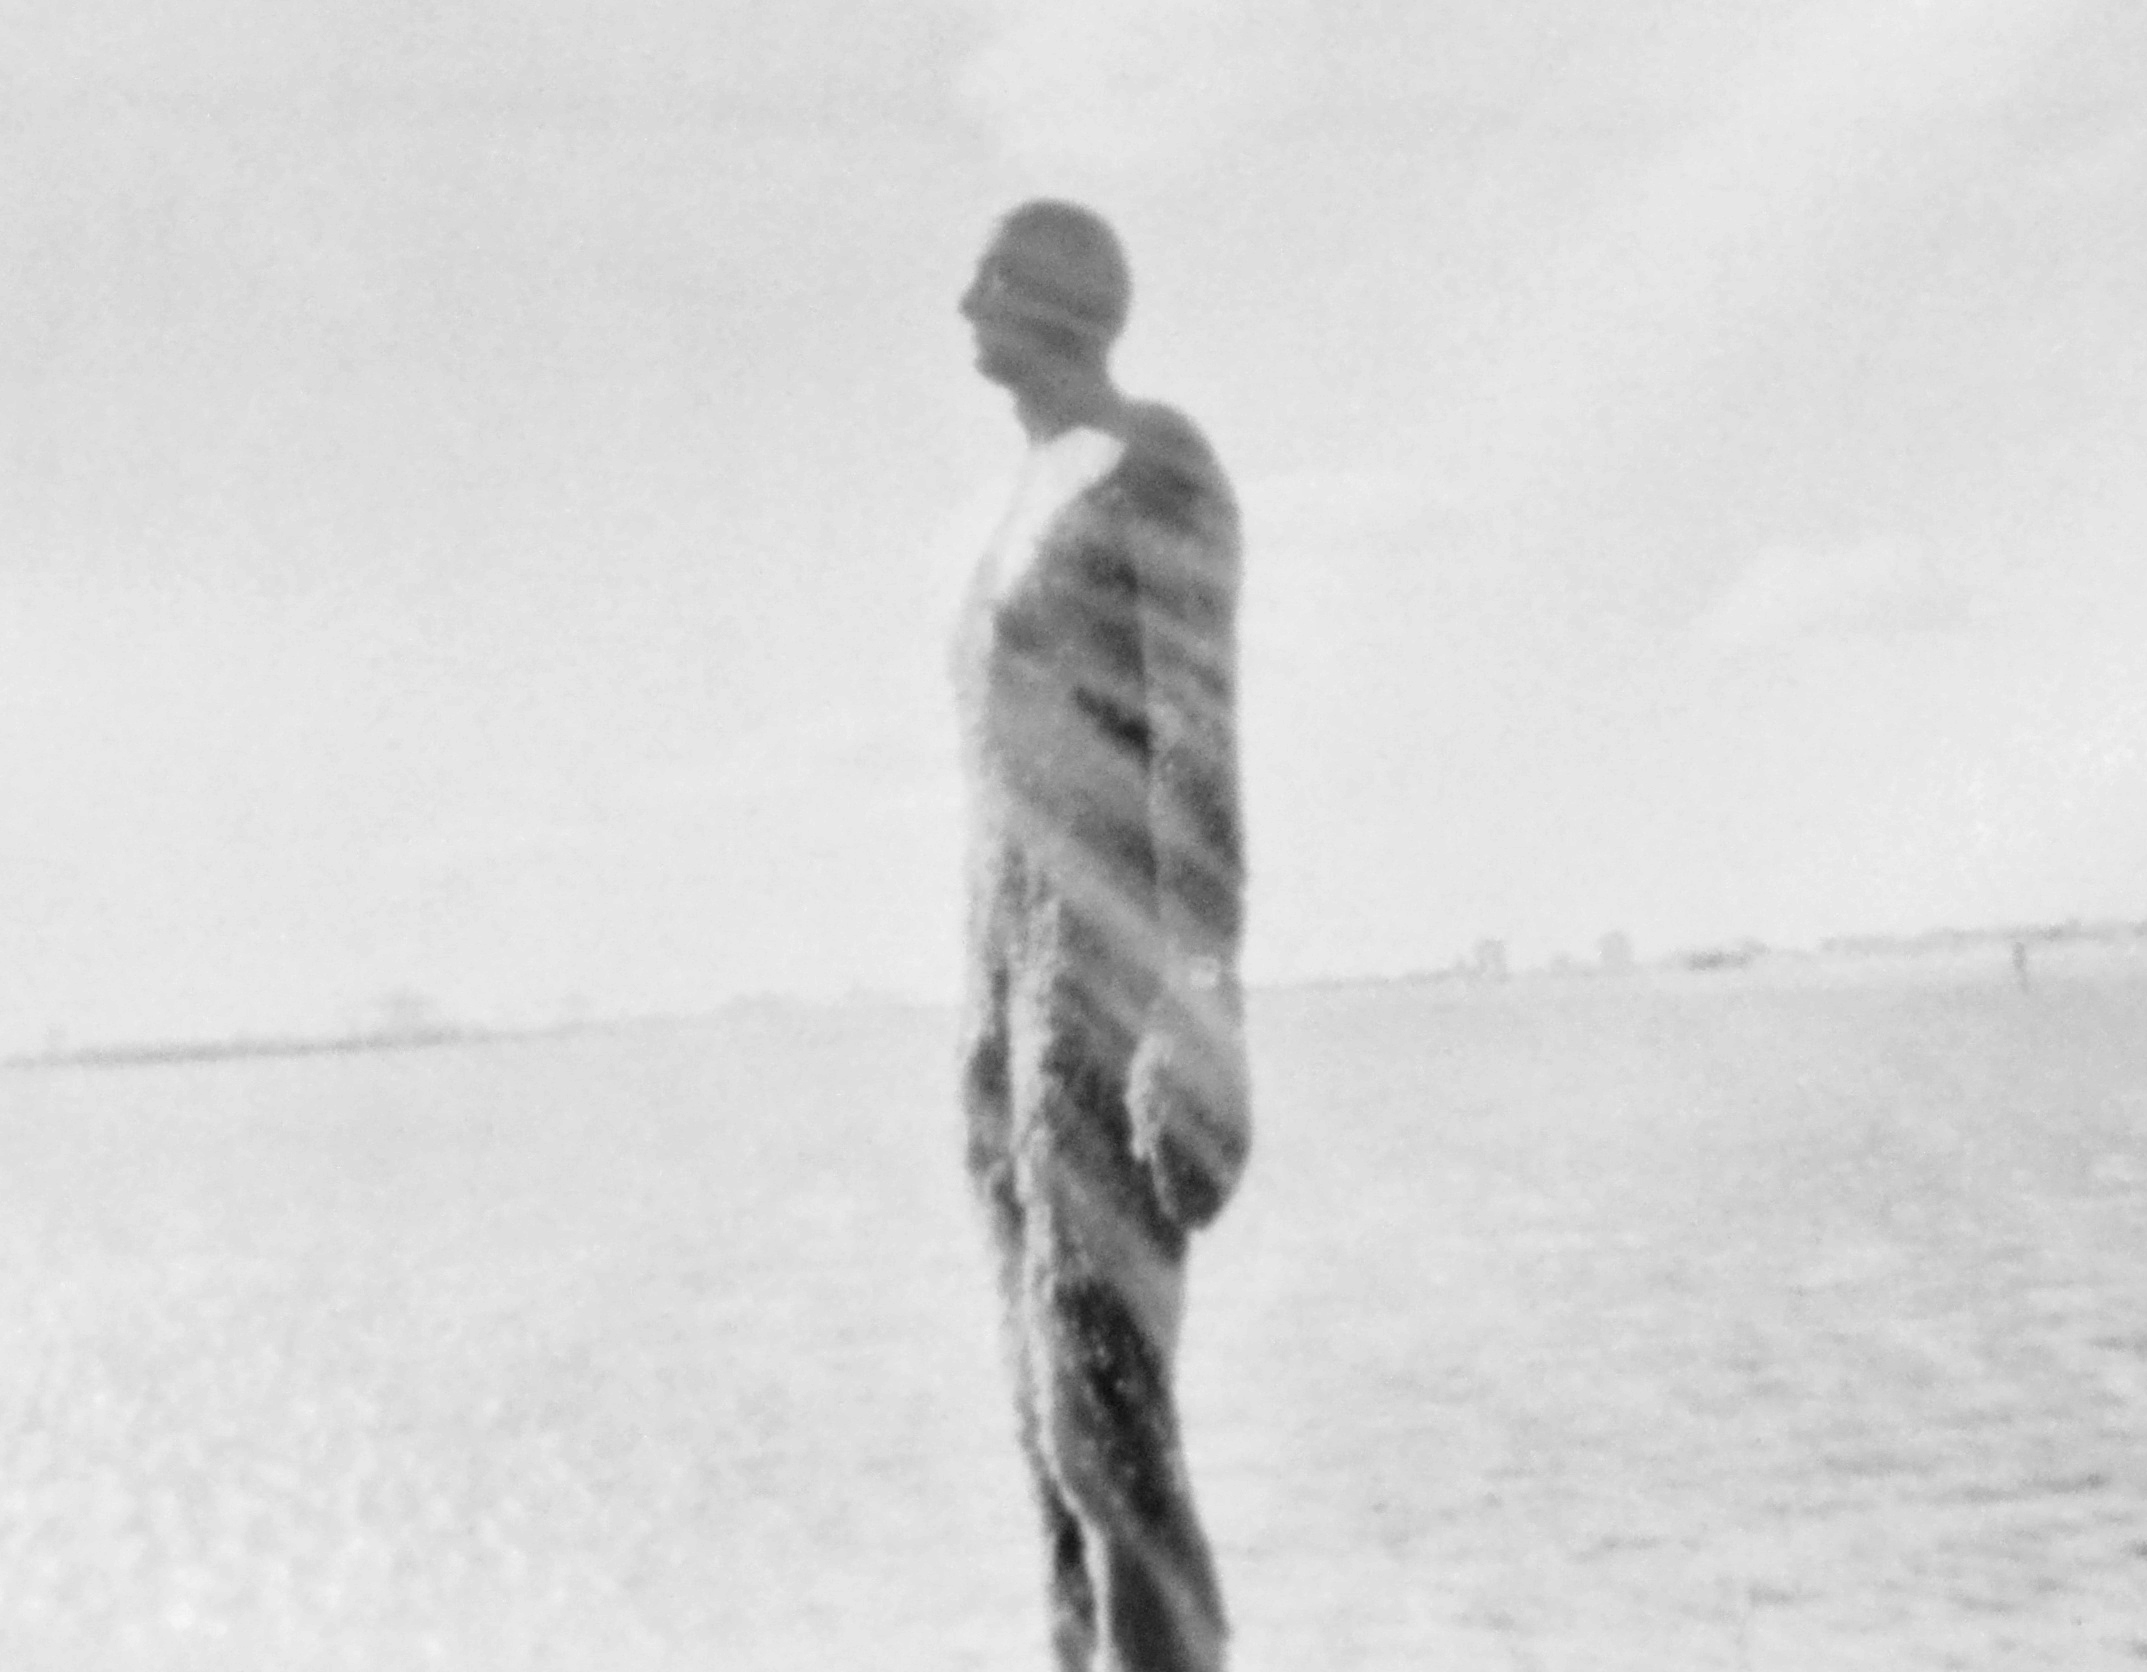 Lucy Wainwright | He Thinks He'd Blow Our Minds | 5x4 pinhole | x-ray film